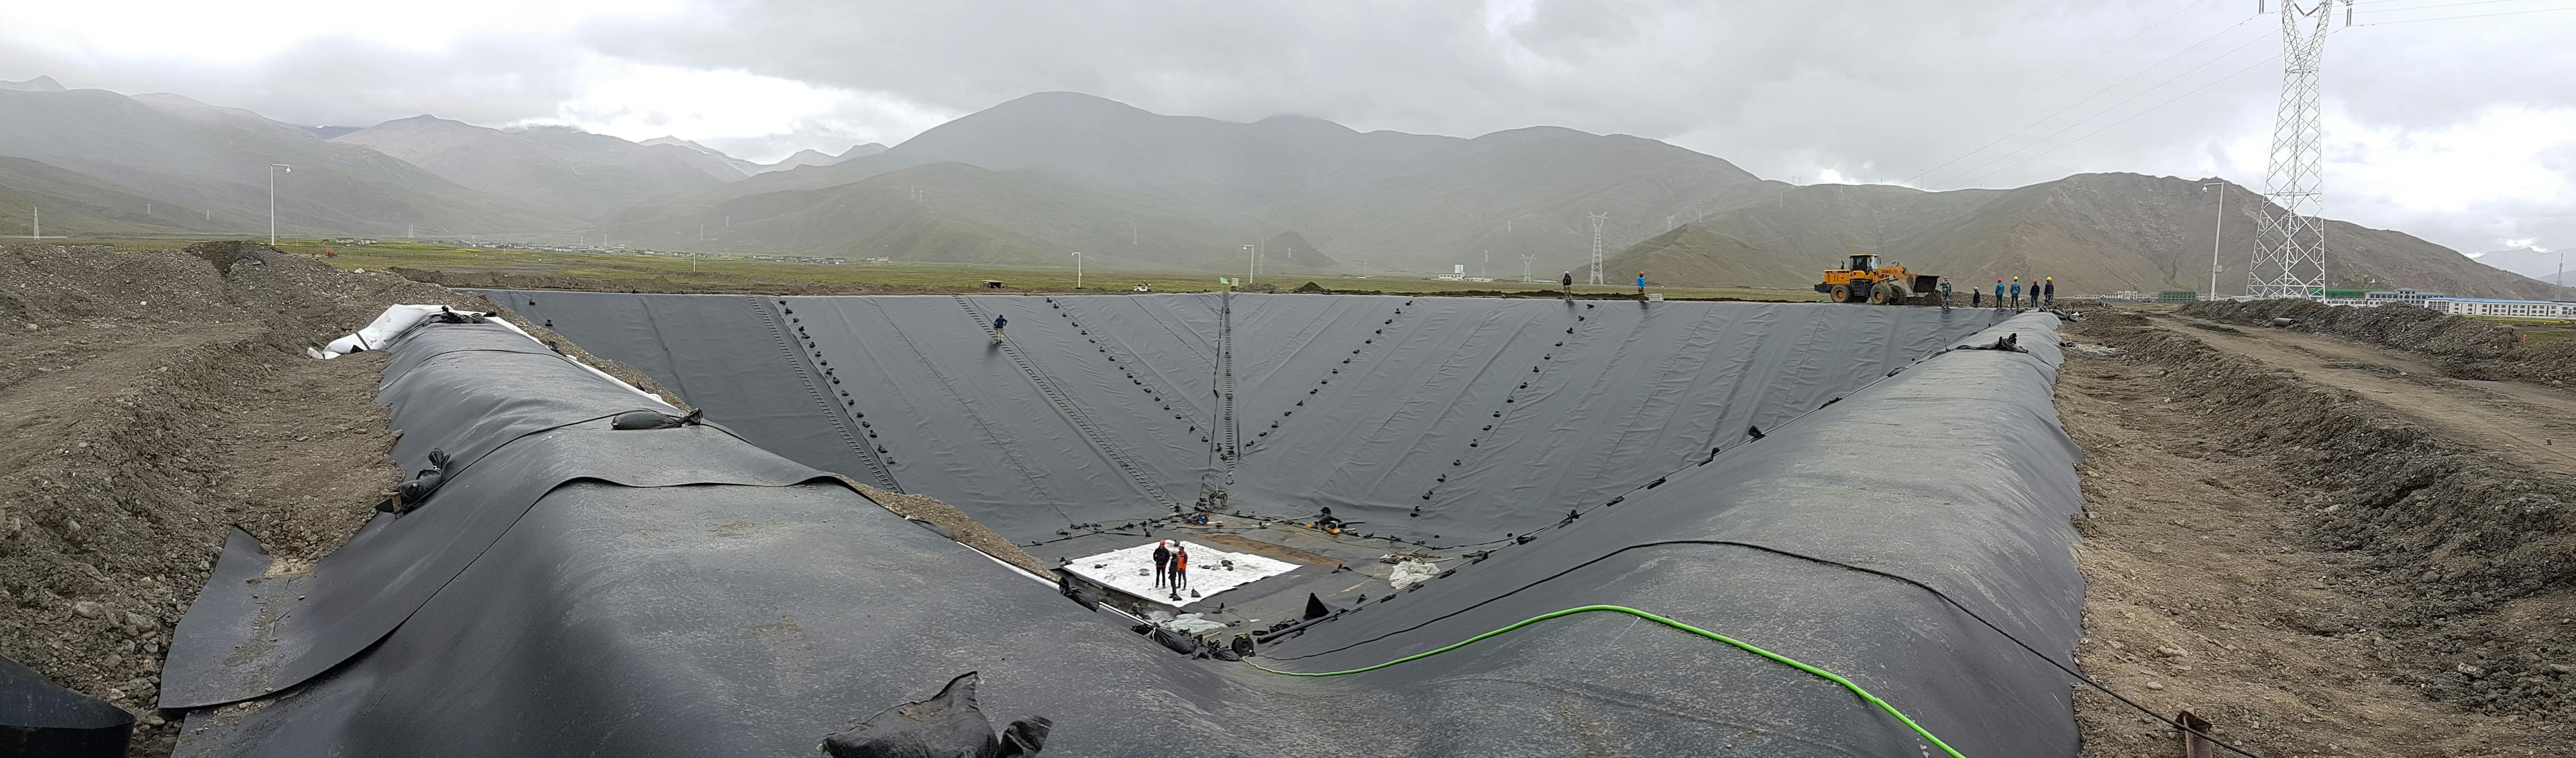 Geosynthetics accelerate agricultural outputs and improve resilience by optimizing water management through enhanced irrigation efficiency and providing structural stability to agricultural infrastructures like dams and reservoirs.